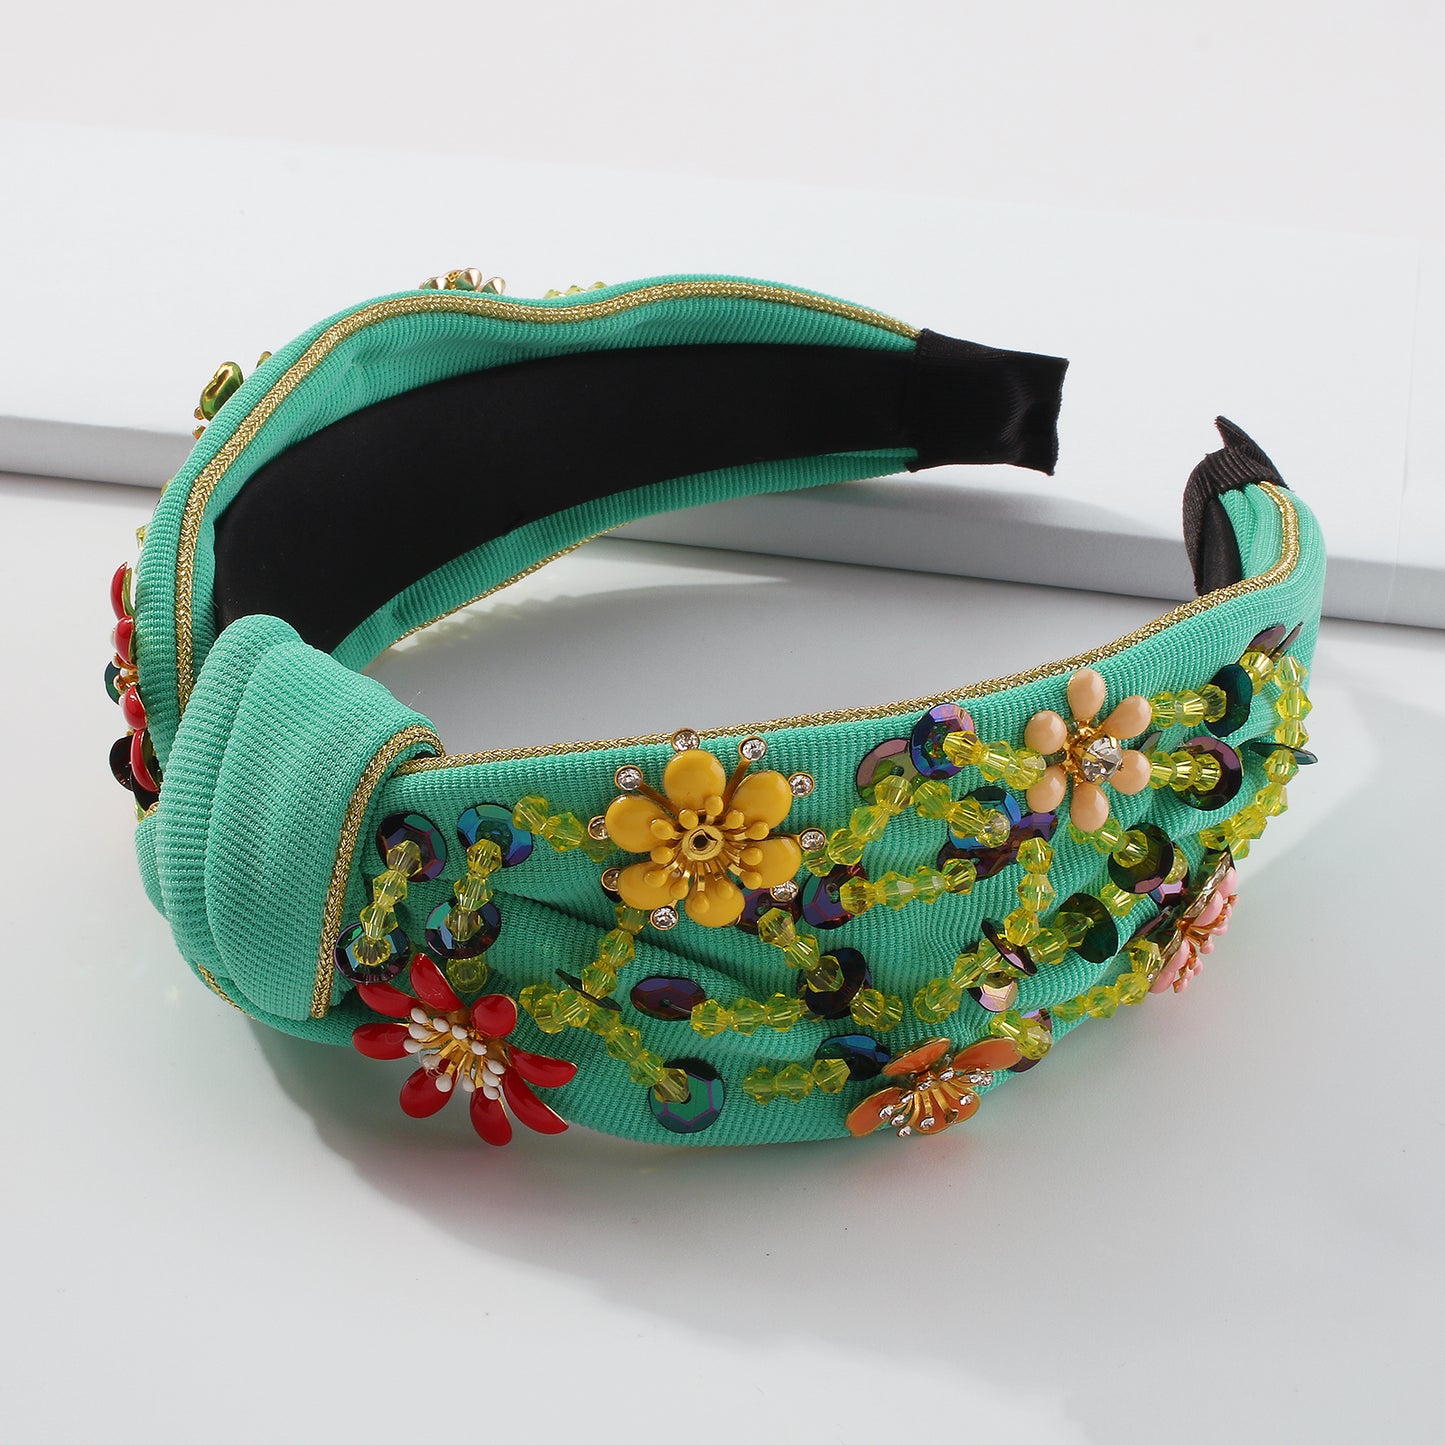 Floral Beaded Embroidery Topknot Headbands medyjewelry